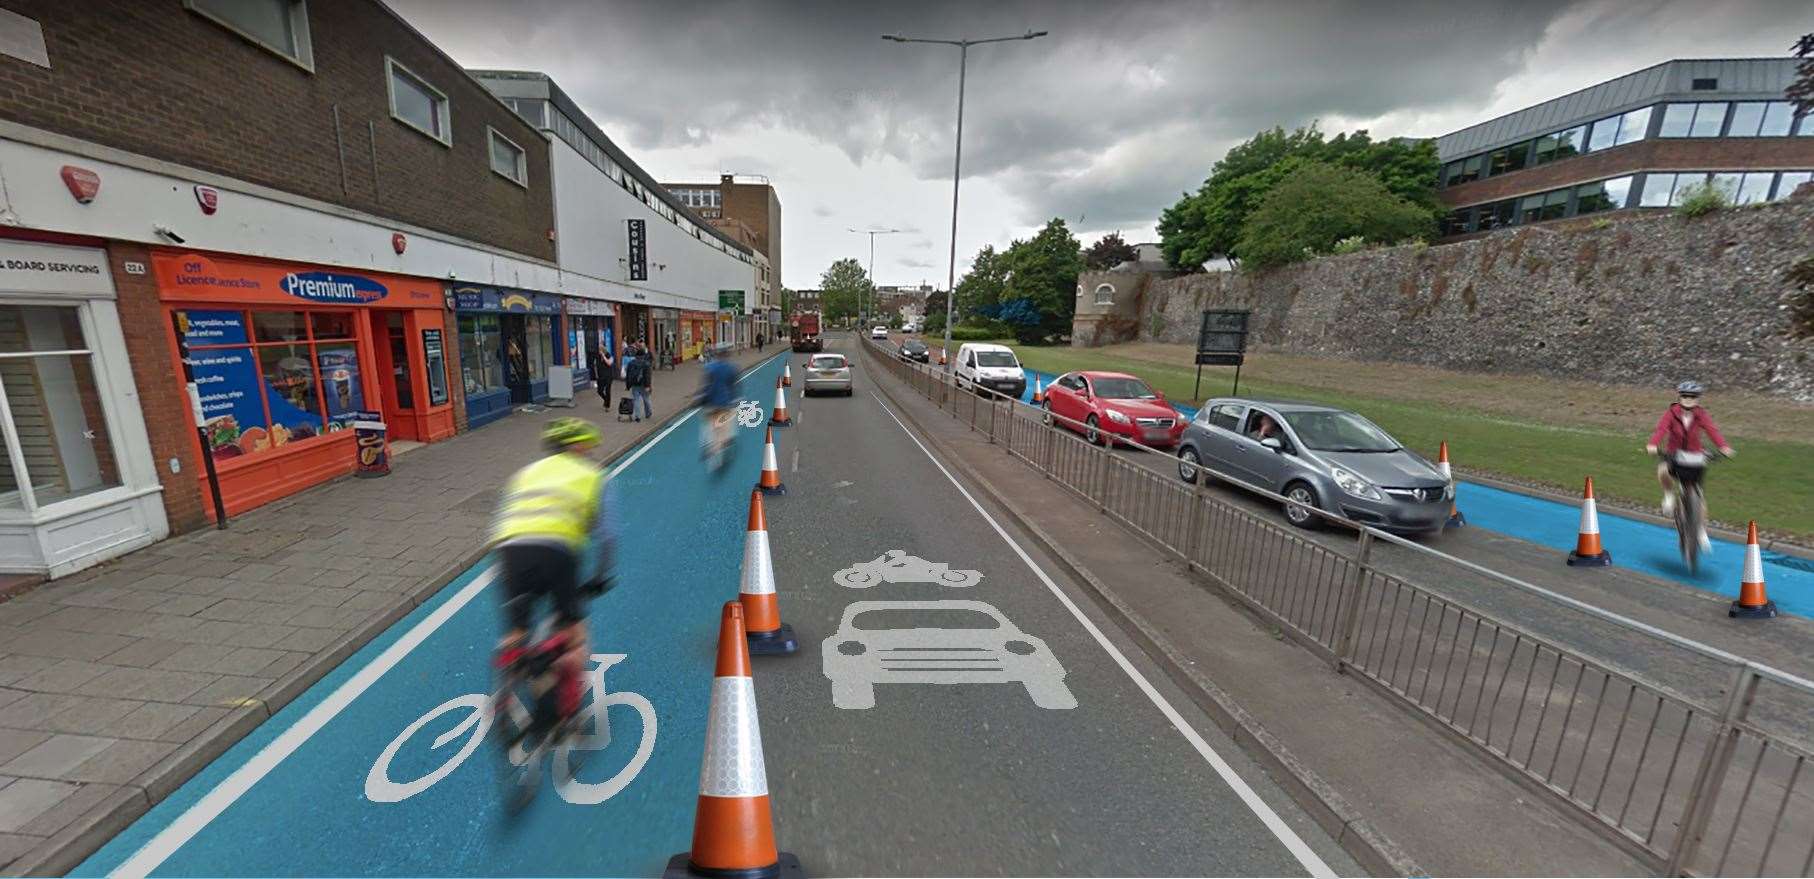 Roads with two lanes could see one taken up by cyclists as this speculative image of the A28 in Canterbury shows. (These changes are just an example and are not endorsed by the council).